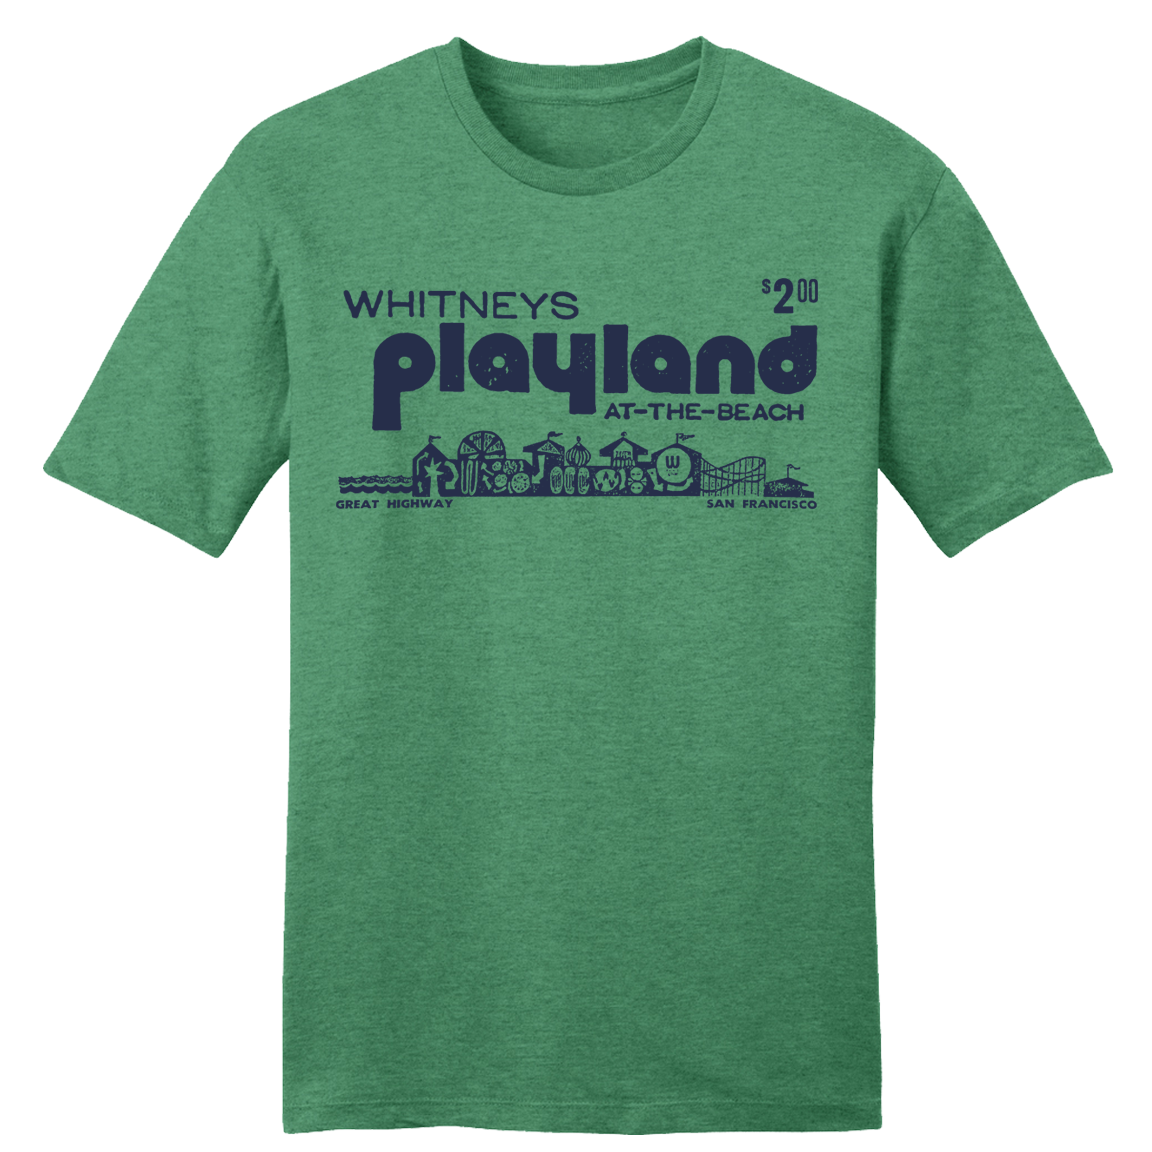 Whitney's Playland At-The-Beach tee